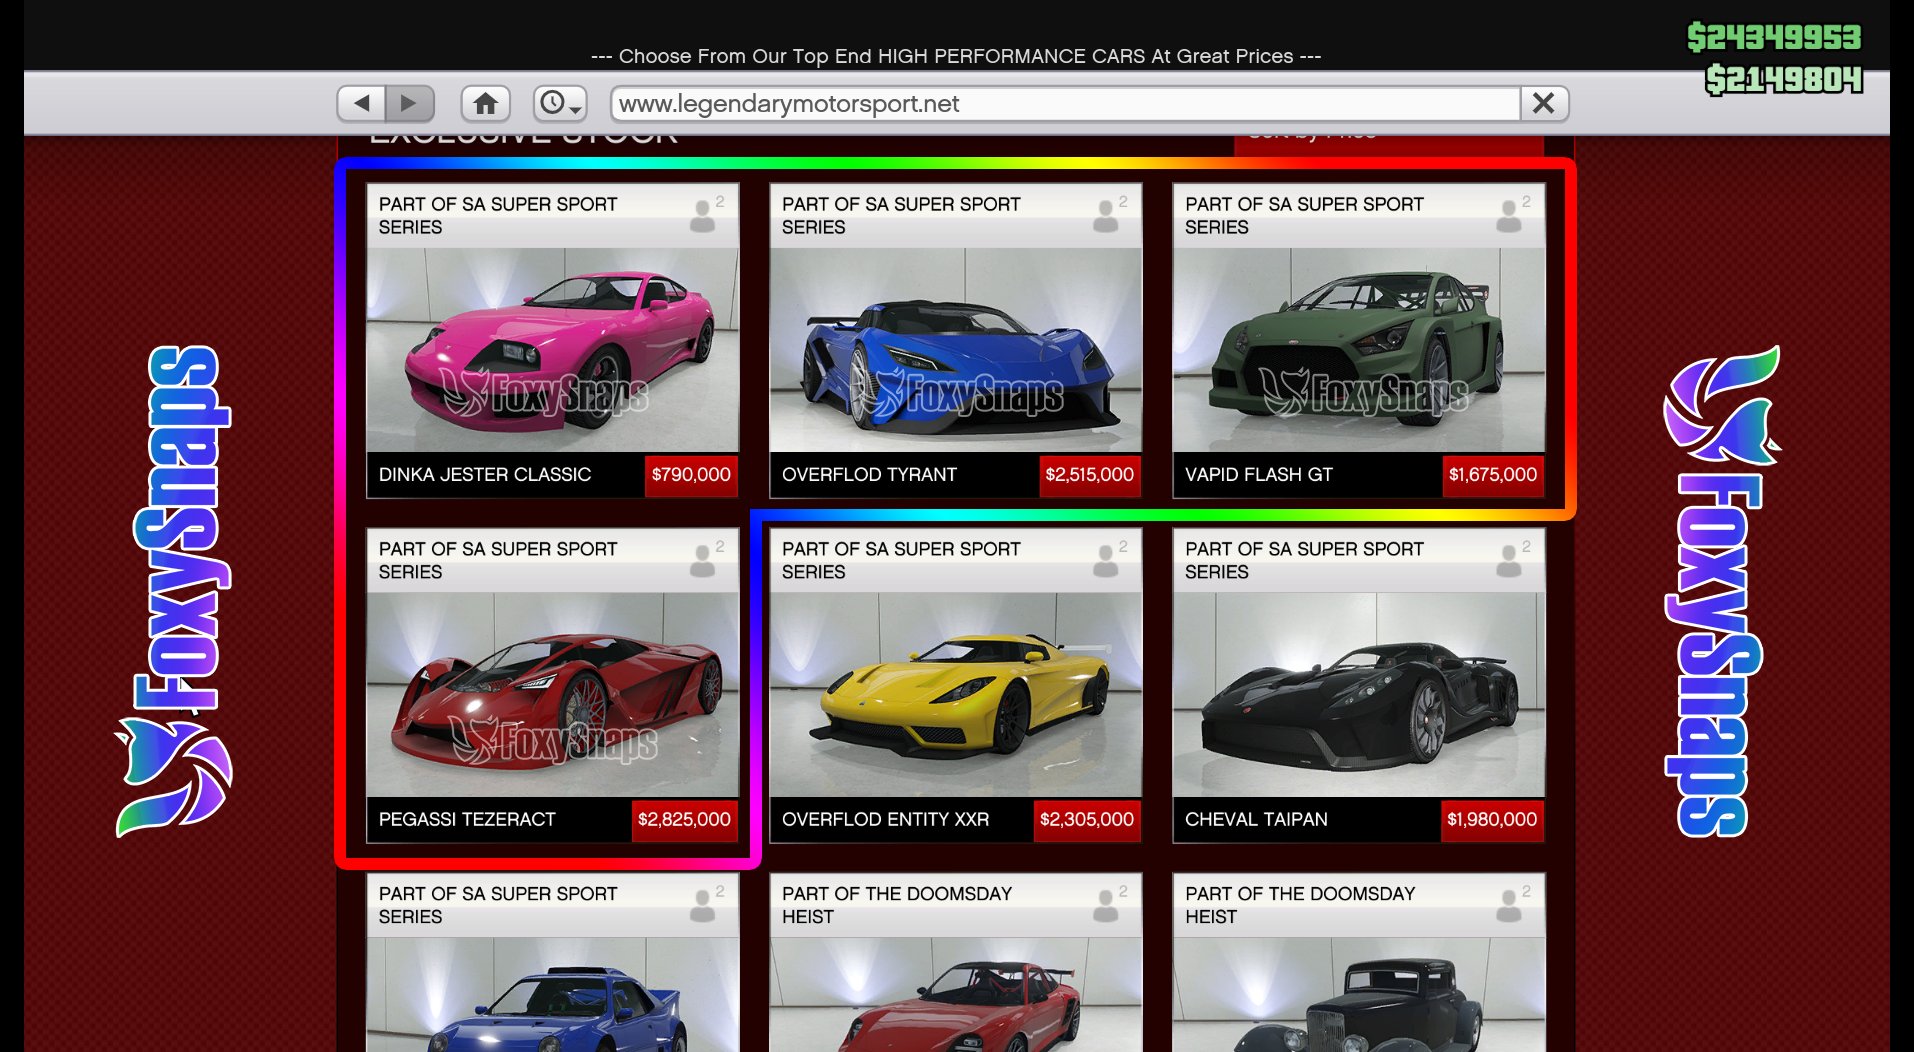 List of all new vehicles and their prices in GTA Online San